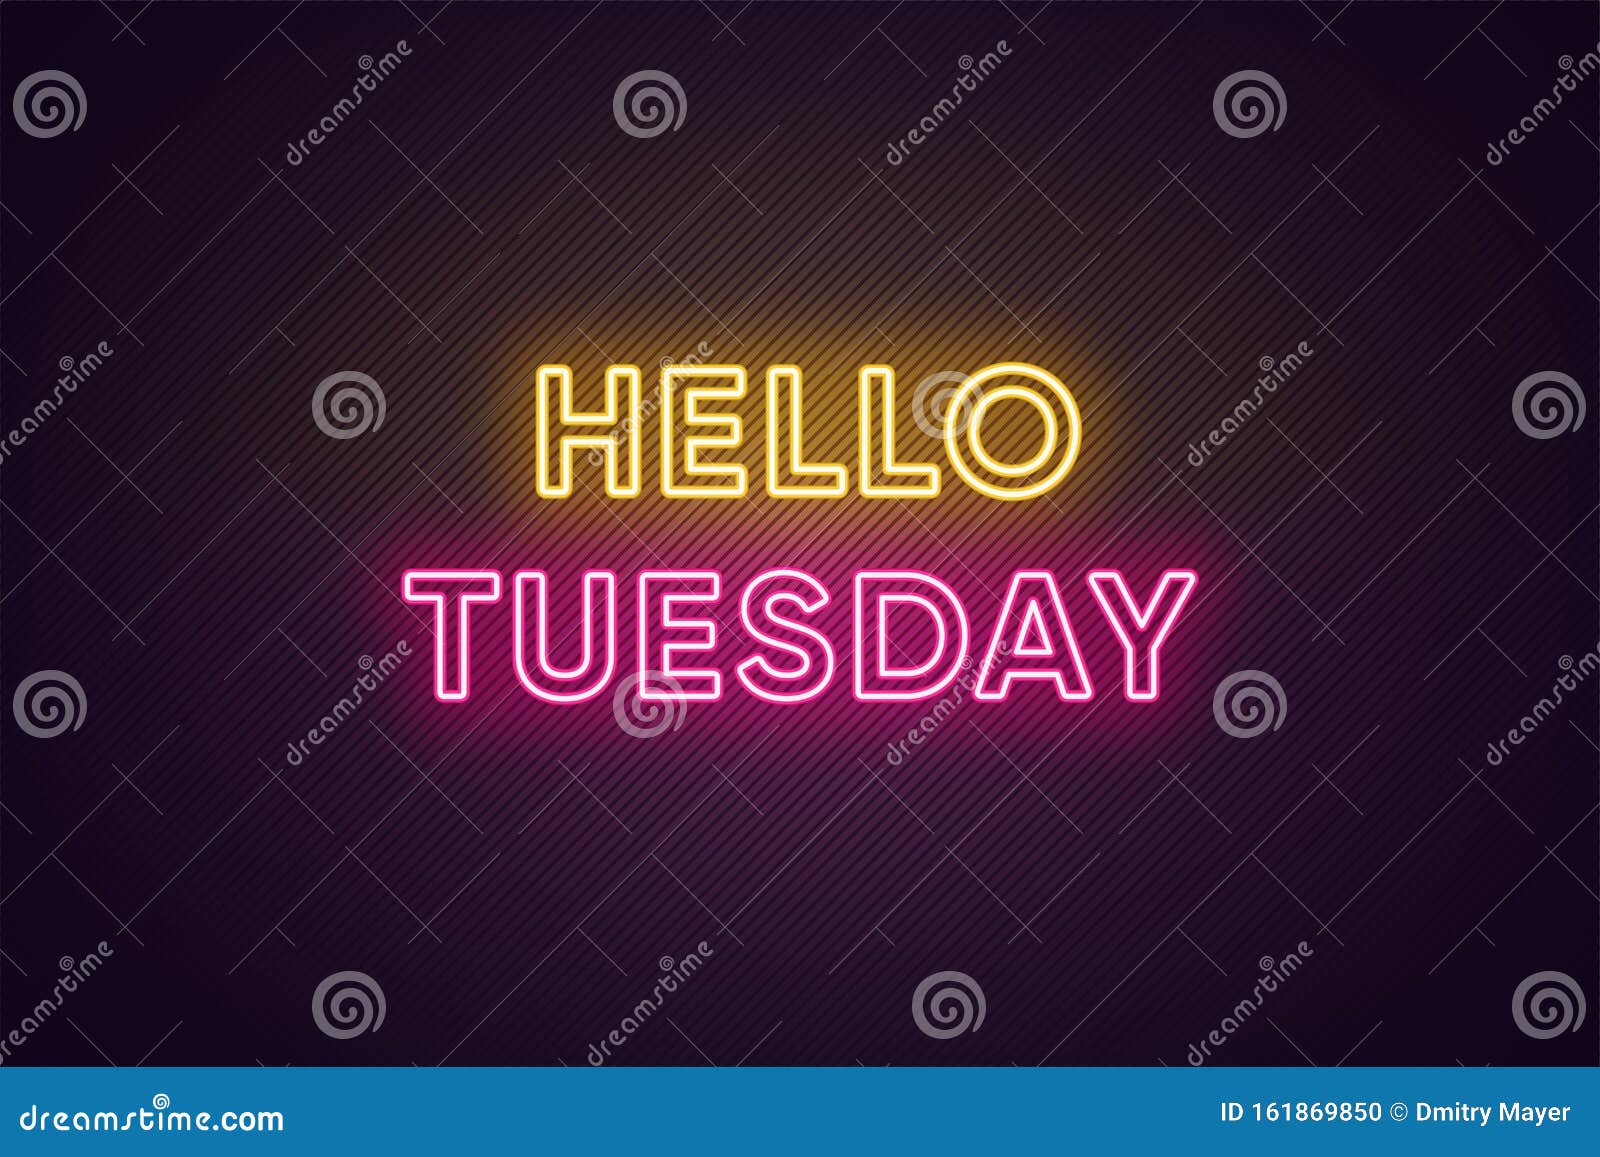 Neon Text of Hello Tuesday. Greeting Banner, Poster with Glowing Neon ...